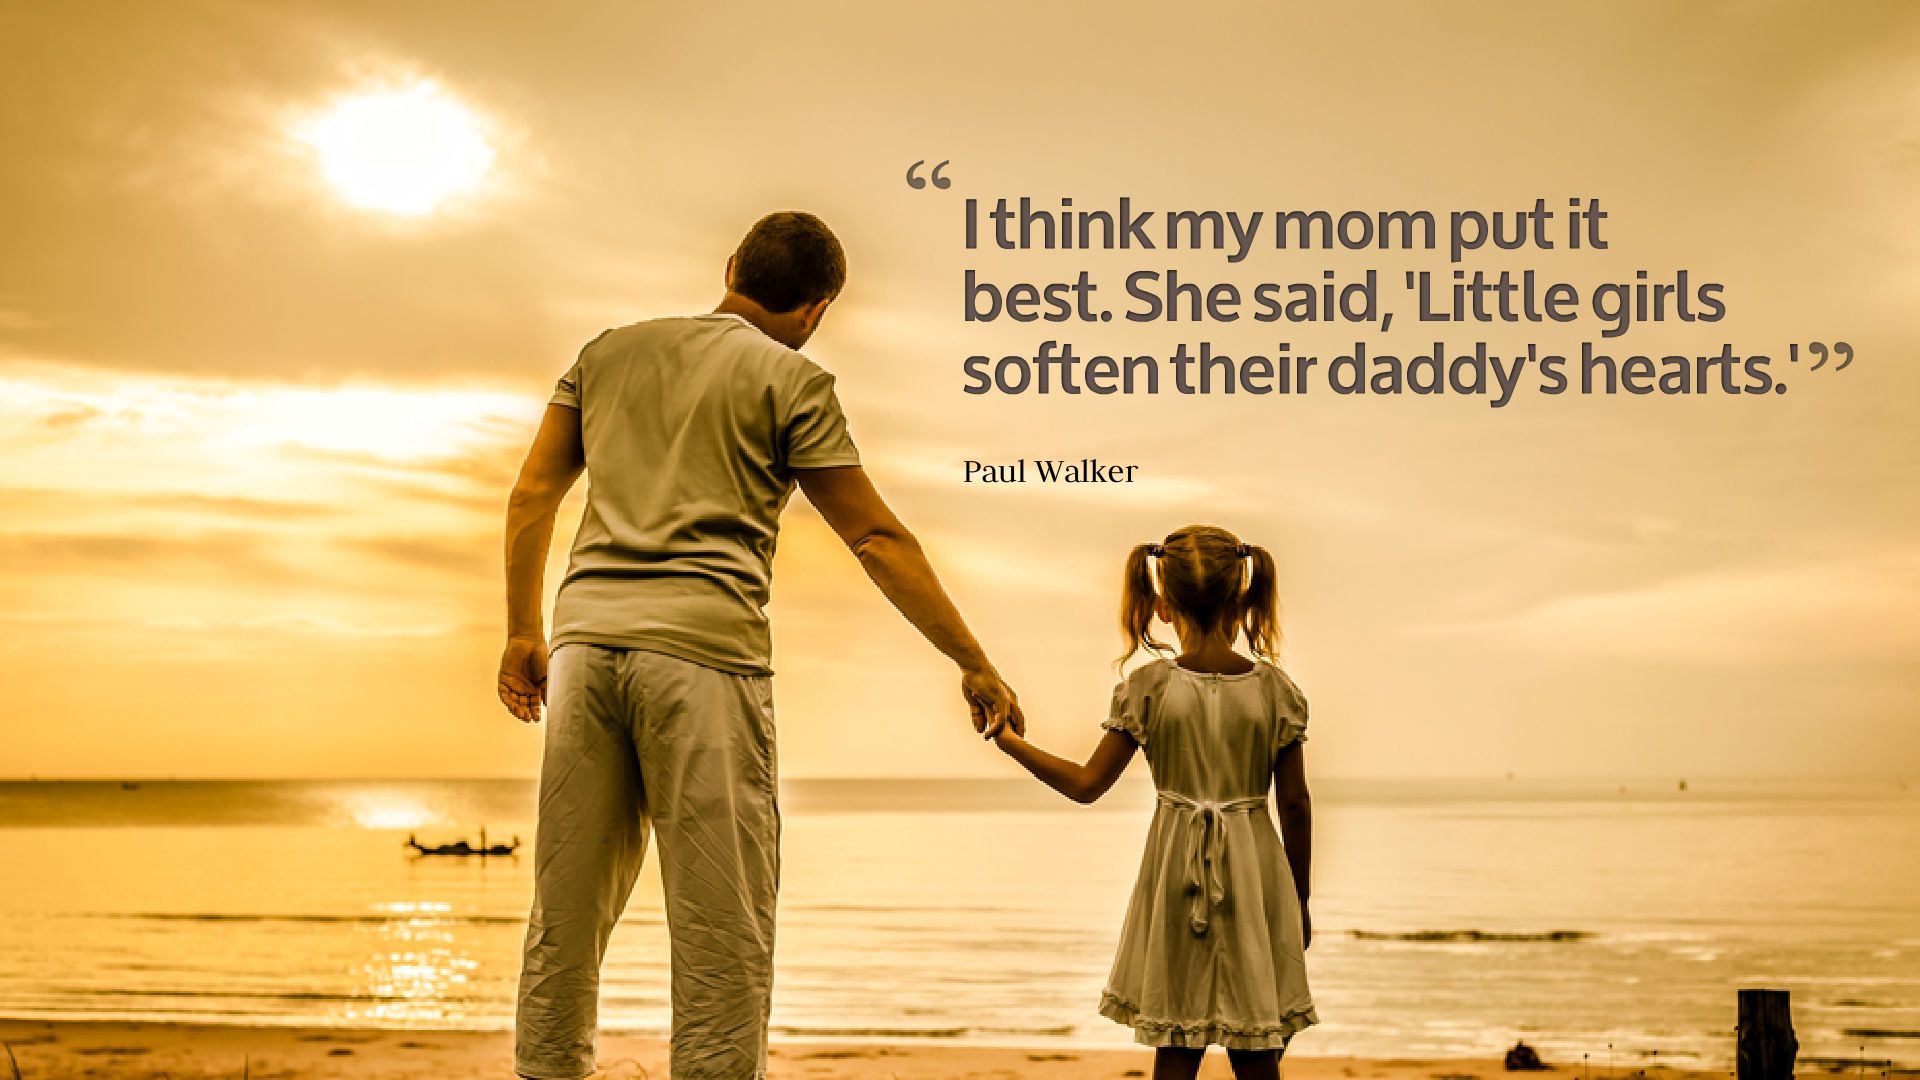 Happy Fathers Day Image, Quotes, 2021 Picture, Wishes, Messages for Facebook & Whatsapp to share